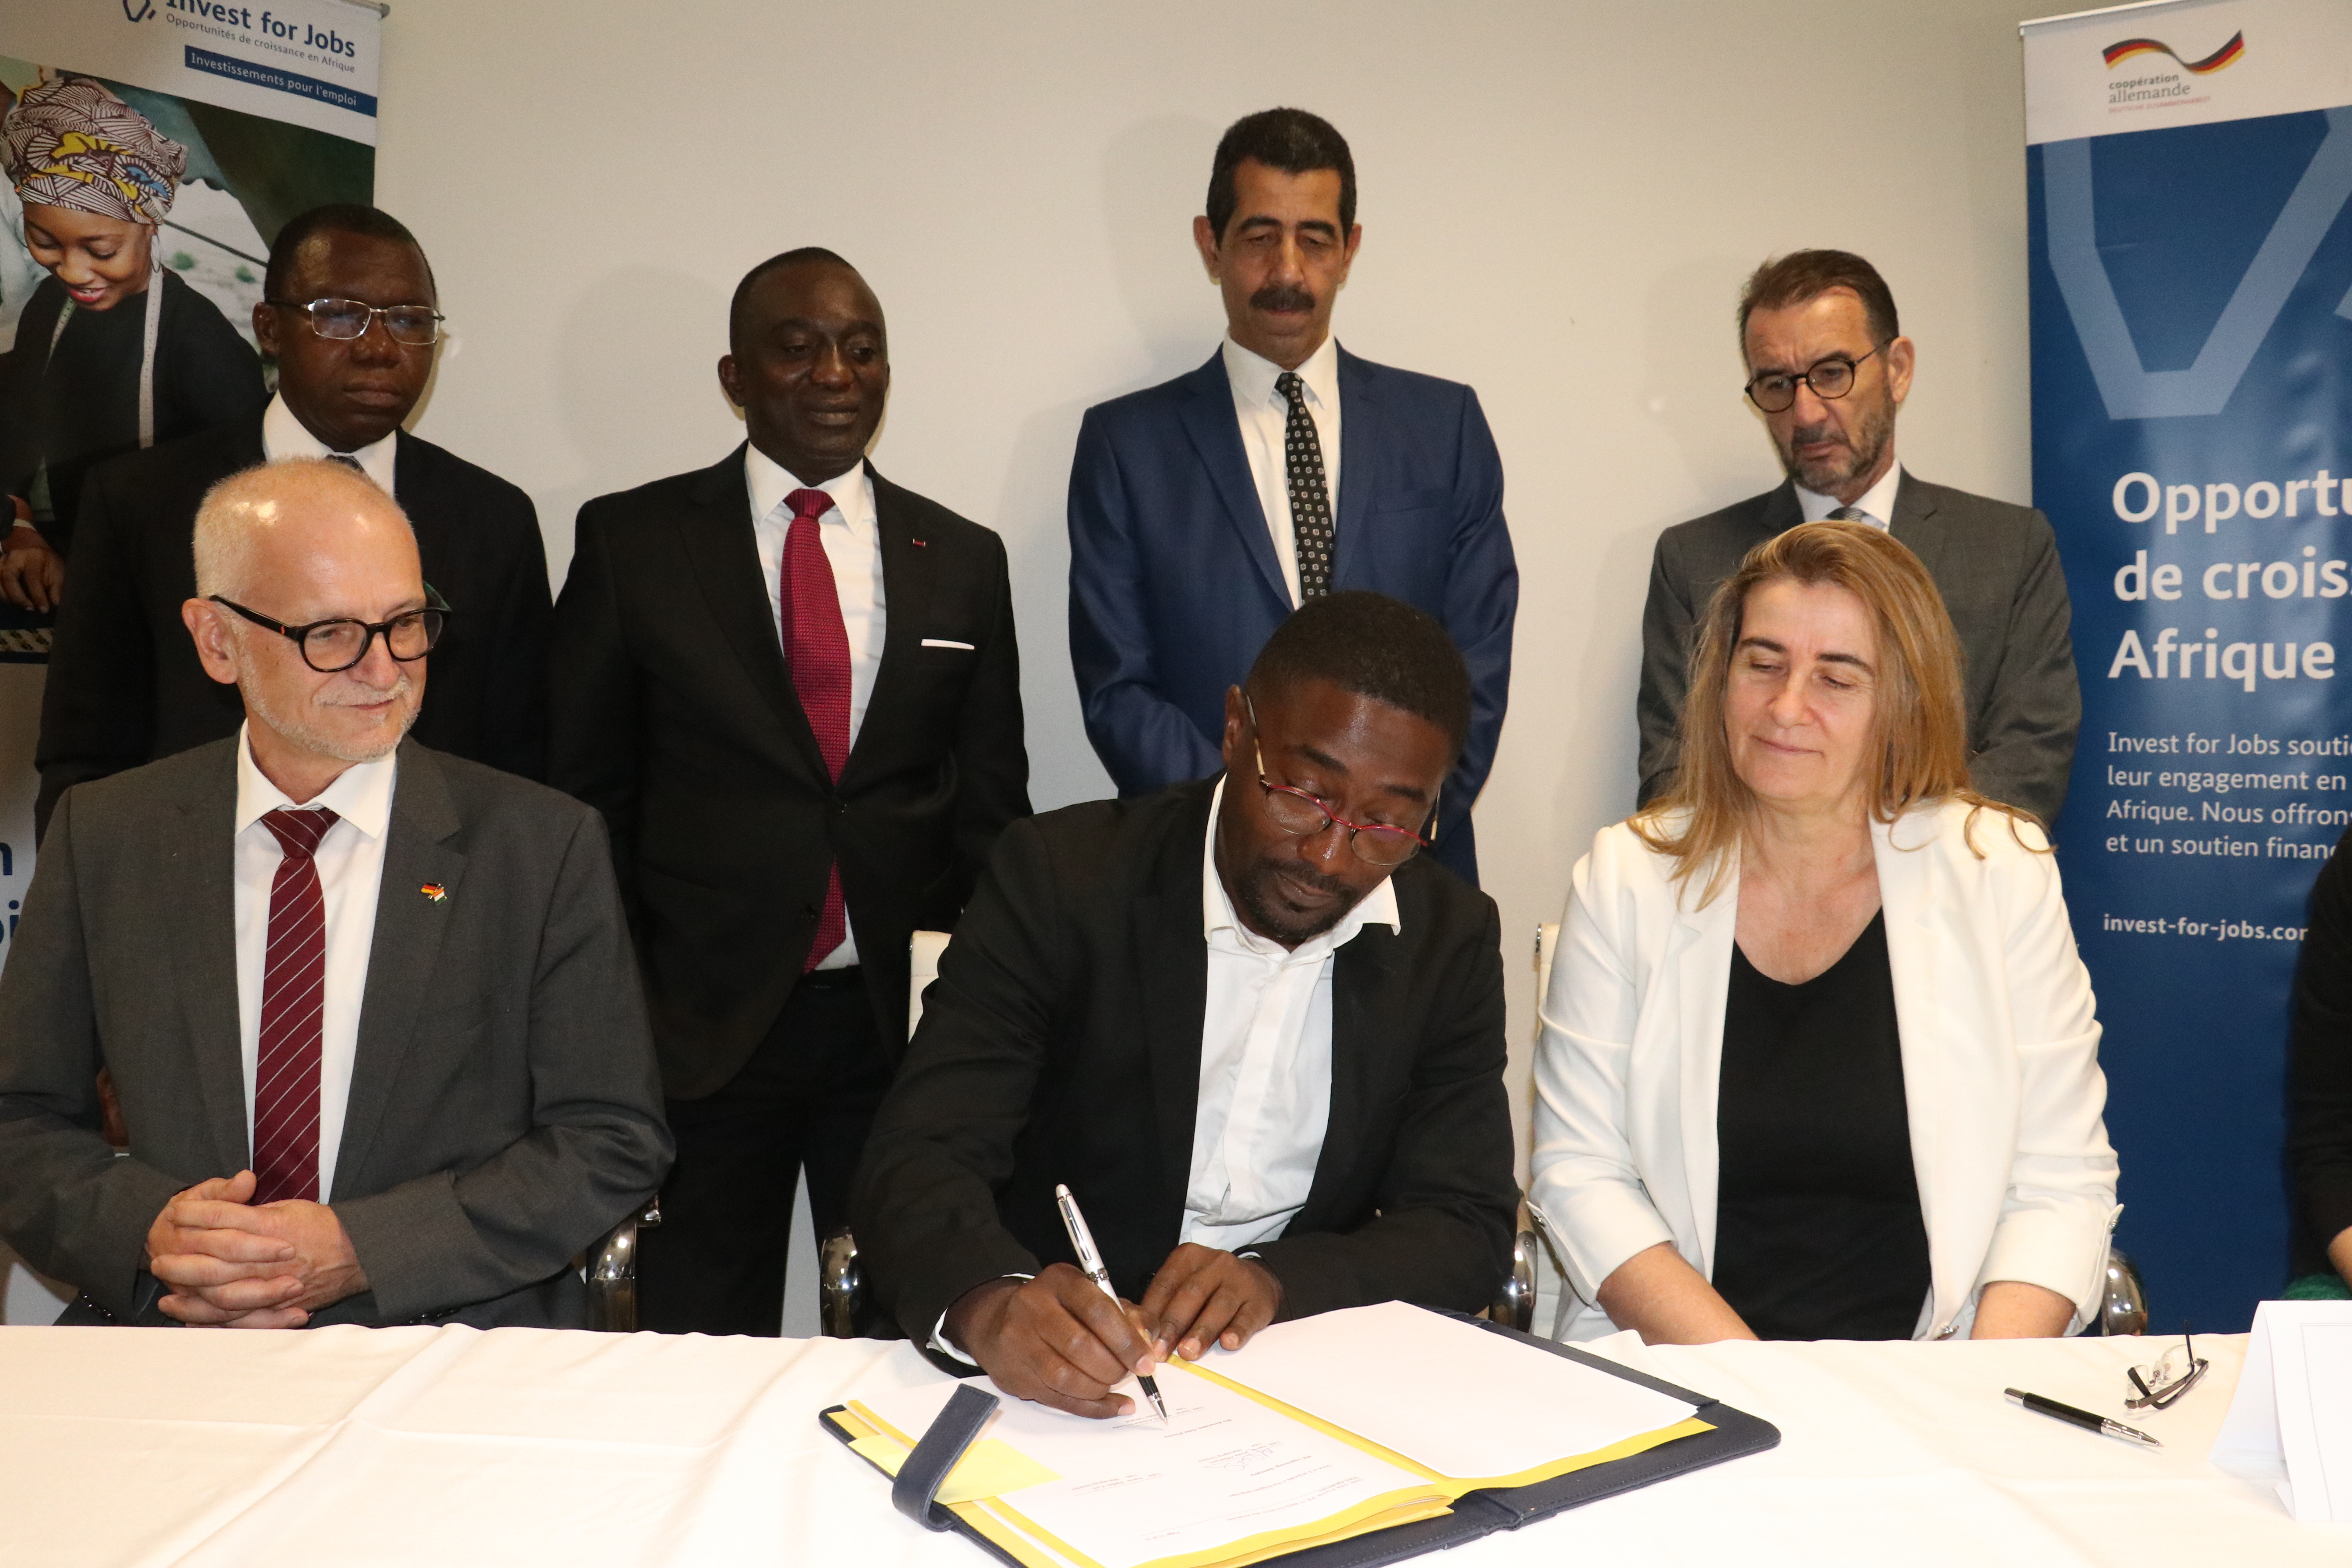 Partner company Bio Amandes and IFE sign their partnership agreement.